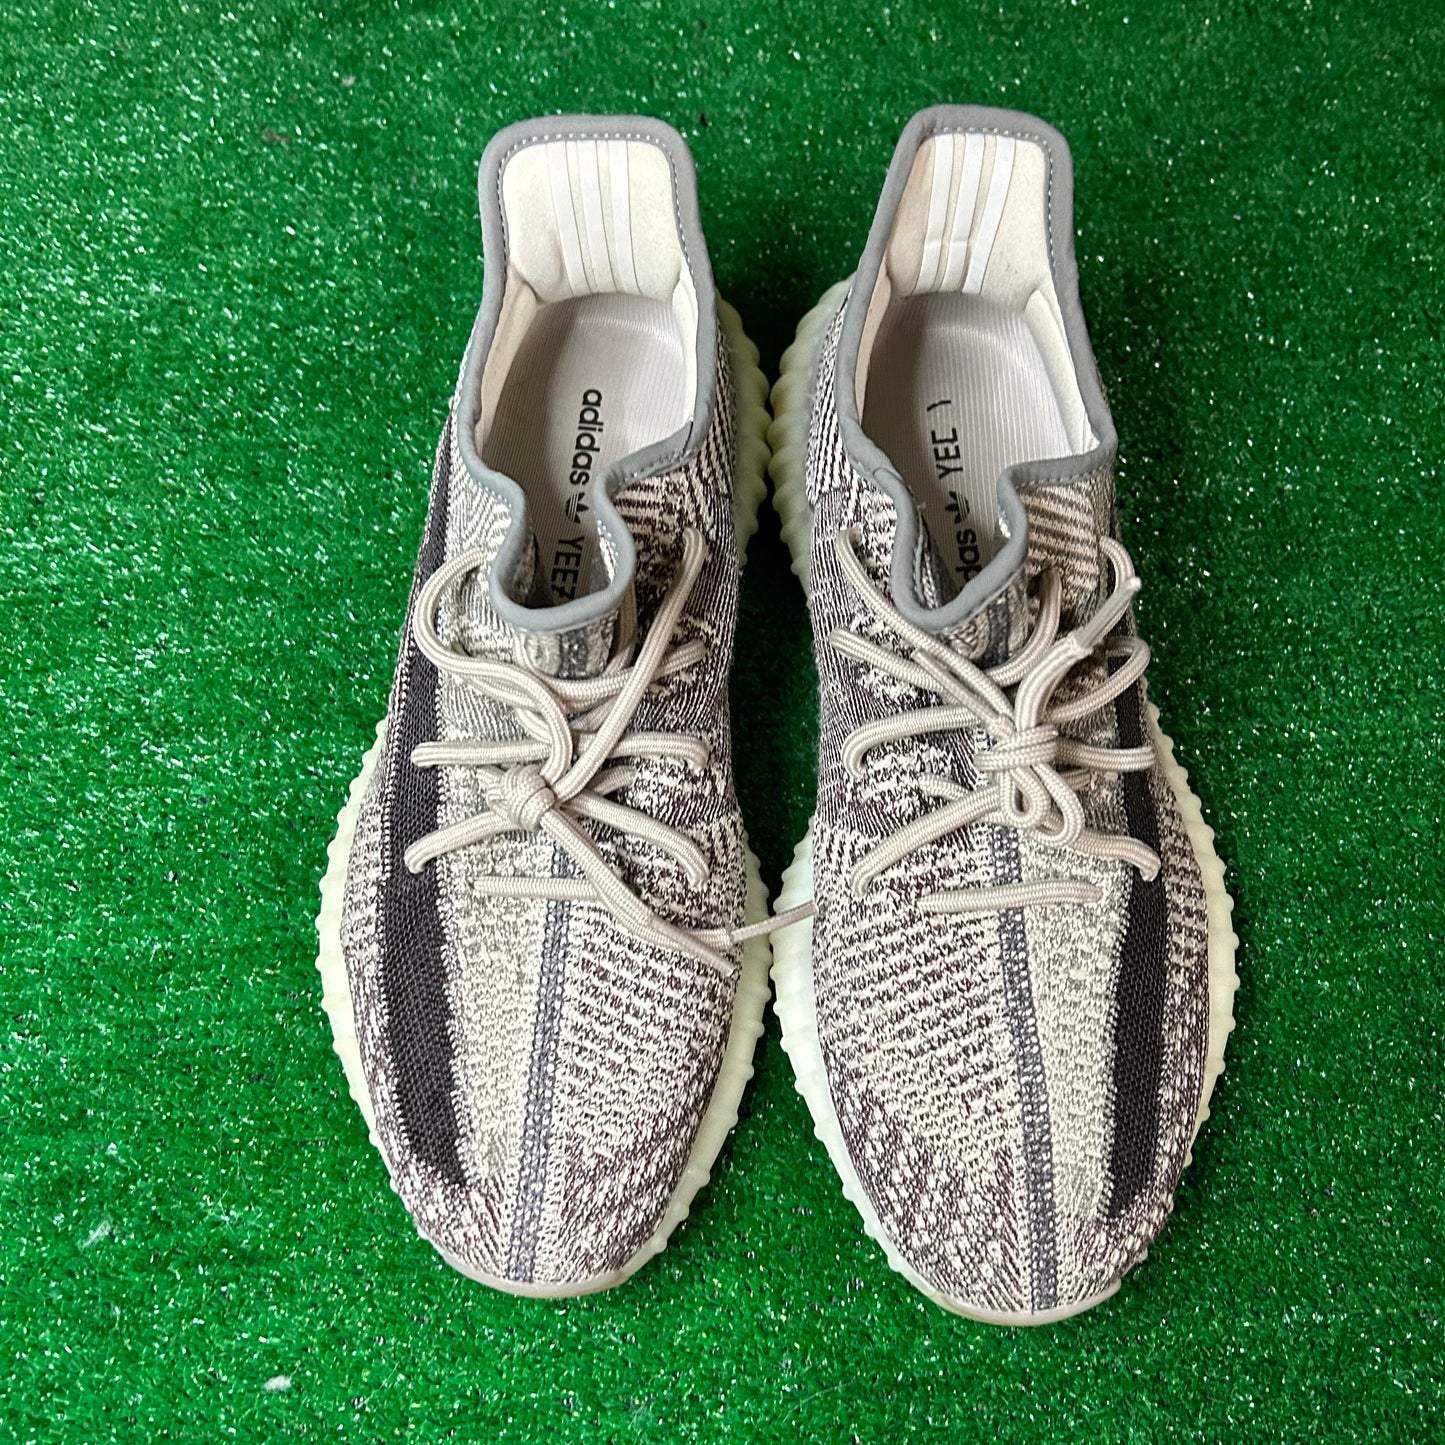 Yeezy Boost 350 V2 Zyon (Pre-Owned)